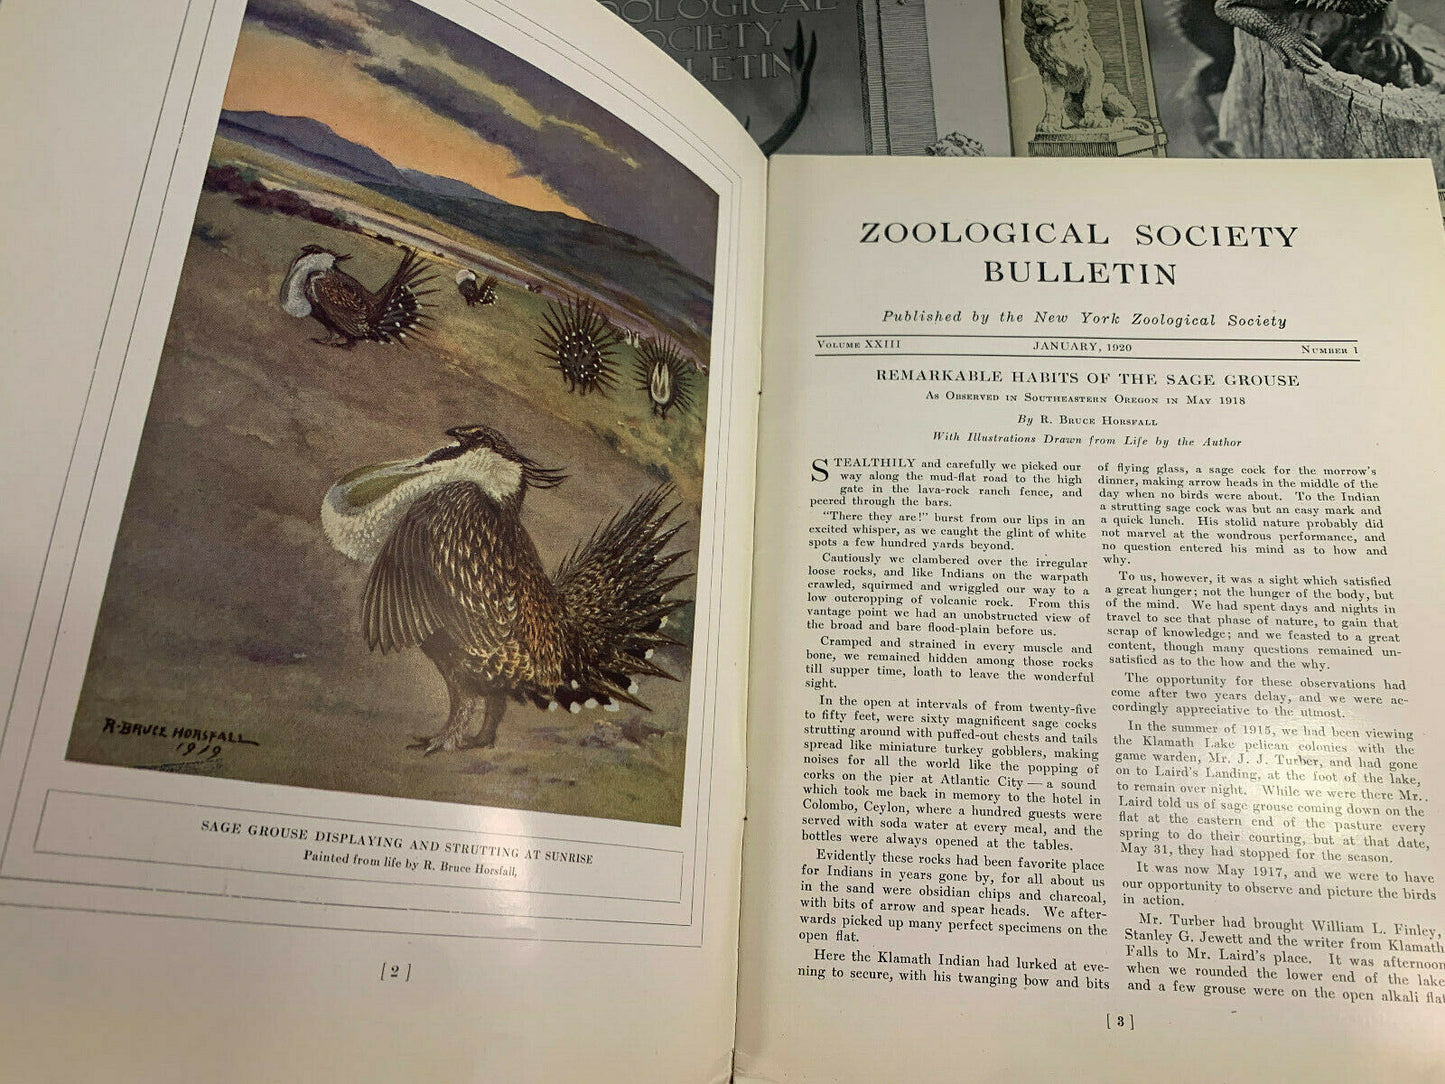 Bulletin: New York Zoological Society - Lot of 6, 1914 - 1928